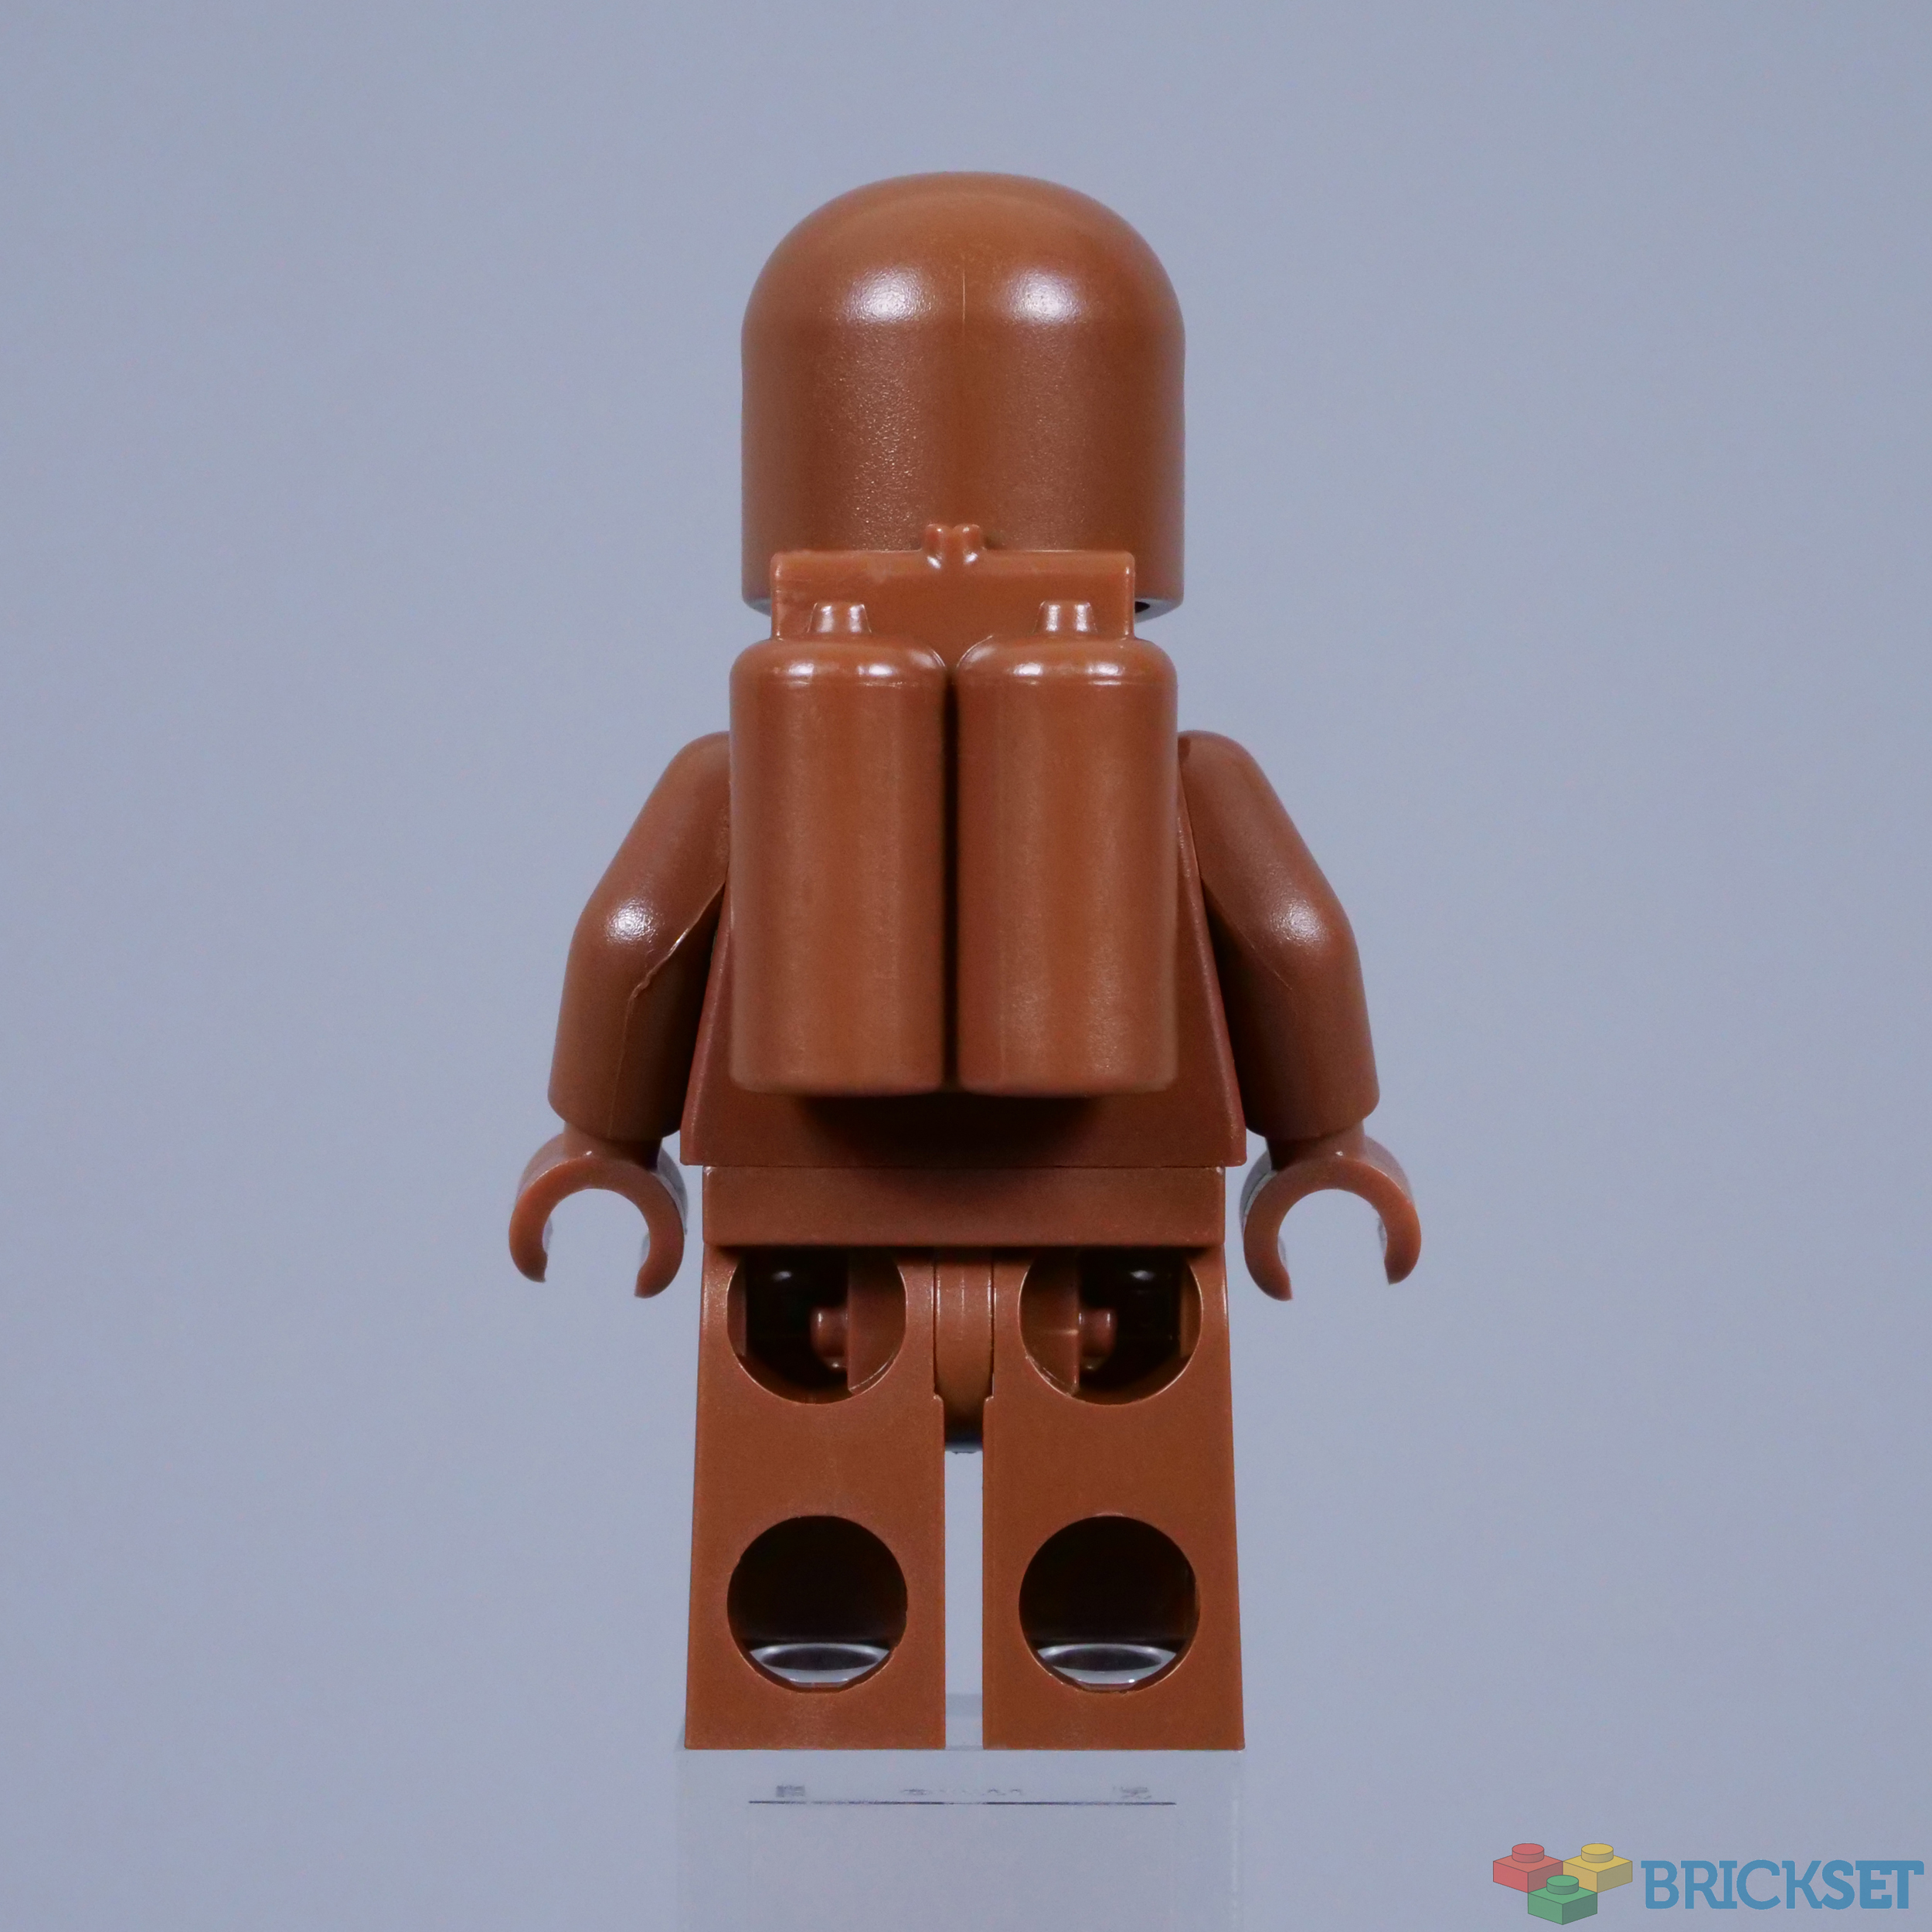 LEGO reveals 71037 Collectible Minifigures Series 24 with 12 new characters  coming Jan. 1 [News] - The Brothers Brick